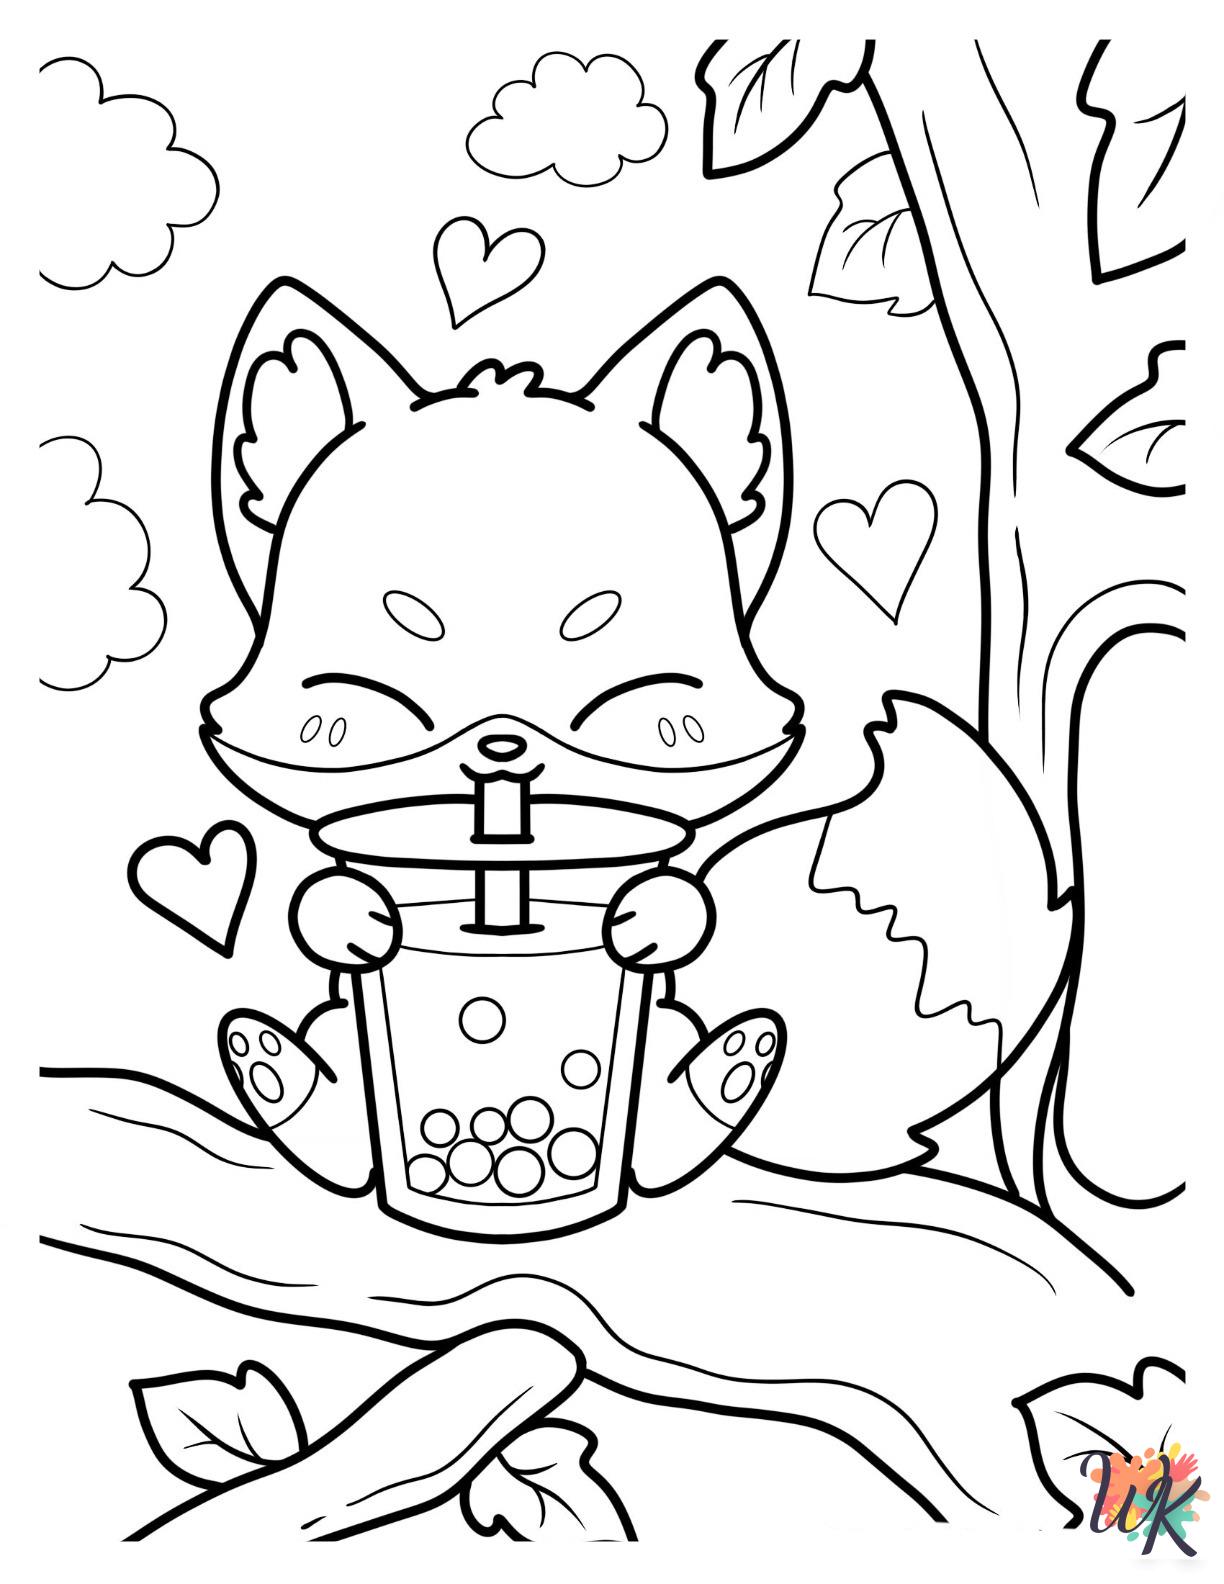 Boba Tea coloring pages for kids